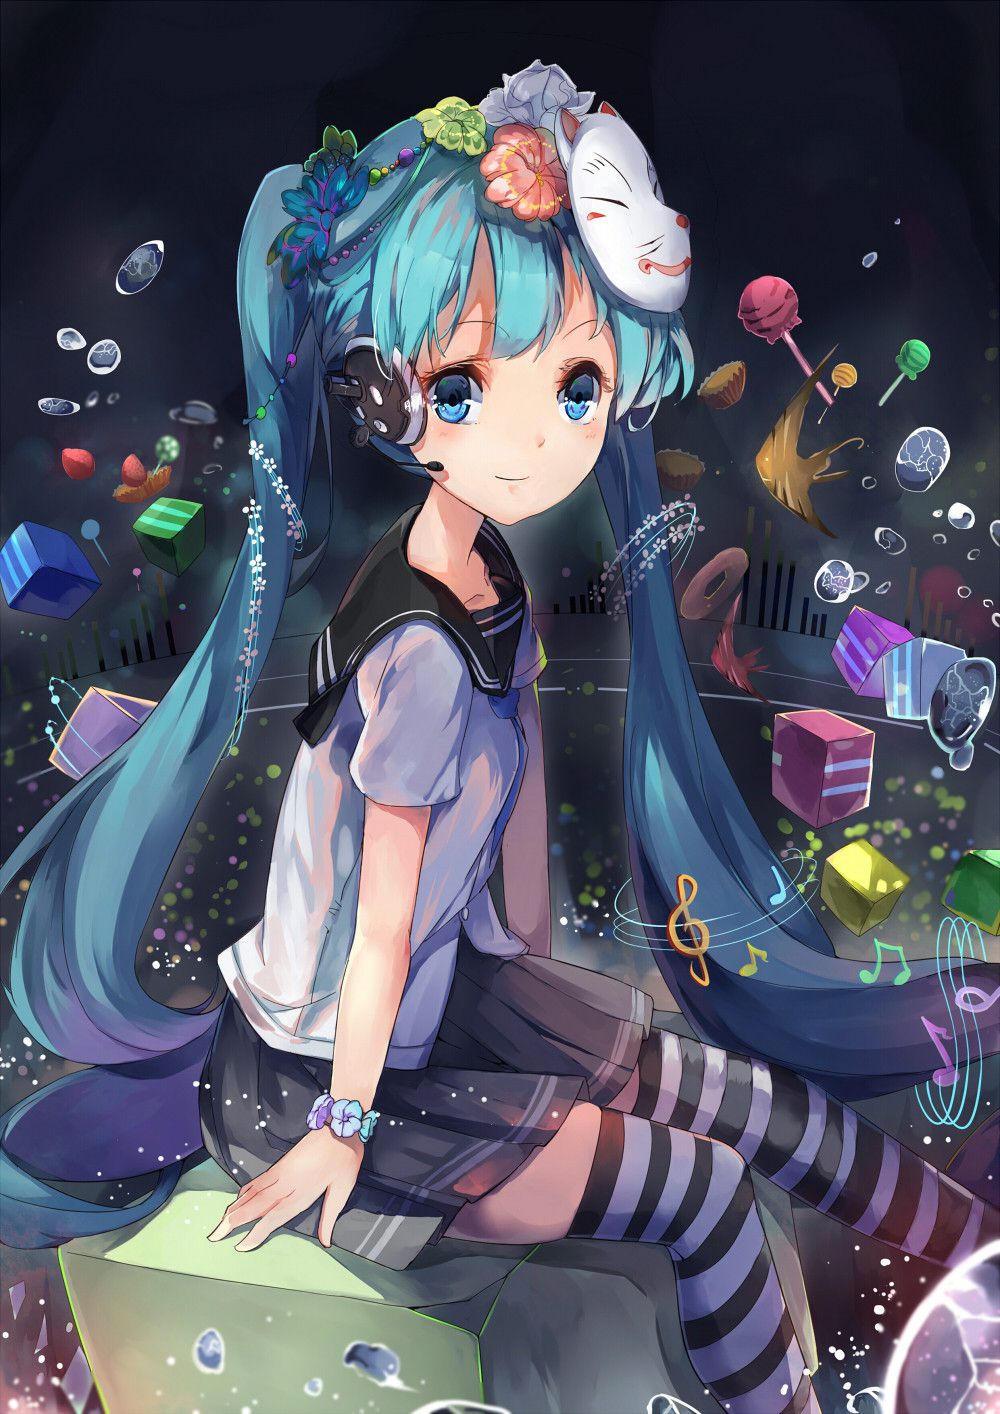 [Secondary] [VOCALOID] want to see images of miku dressed in school uniform! 3 4